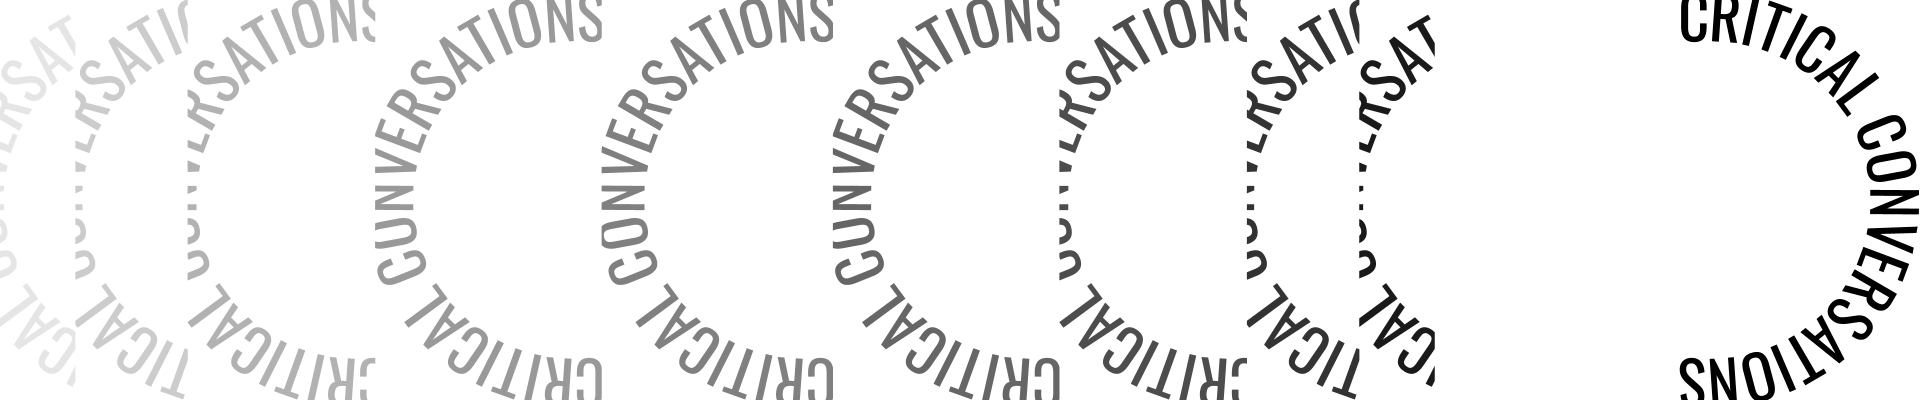 Critical Conversations logo repeated in grayscale